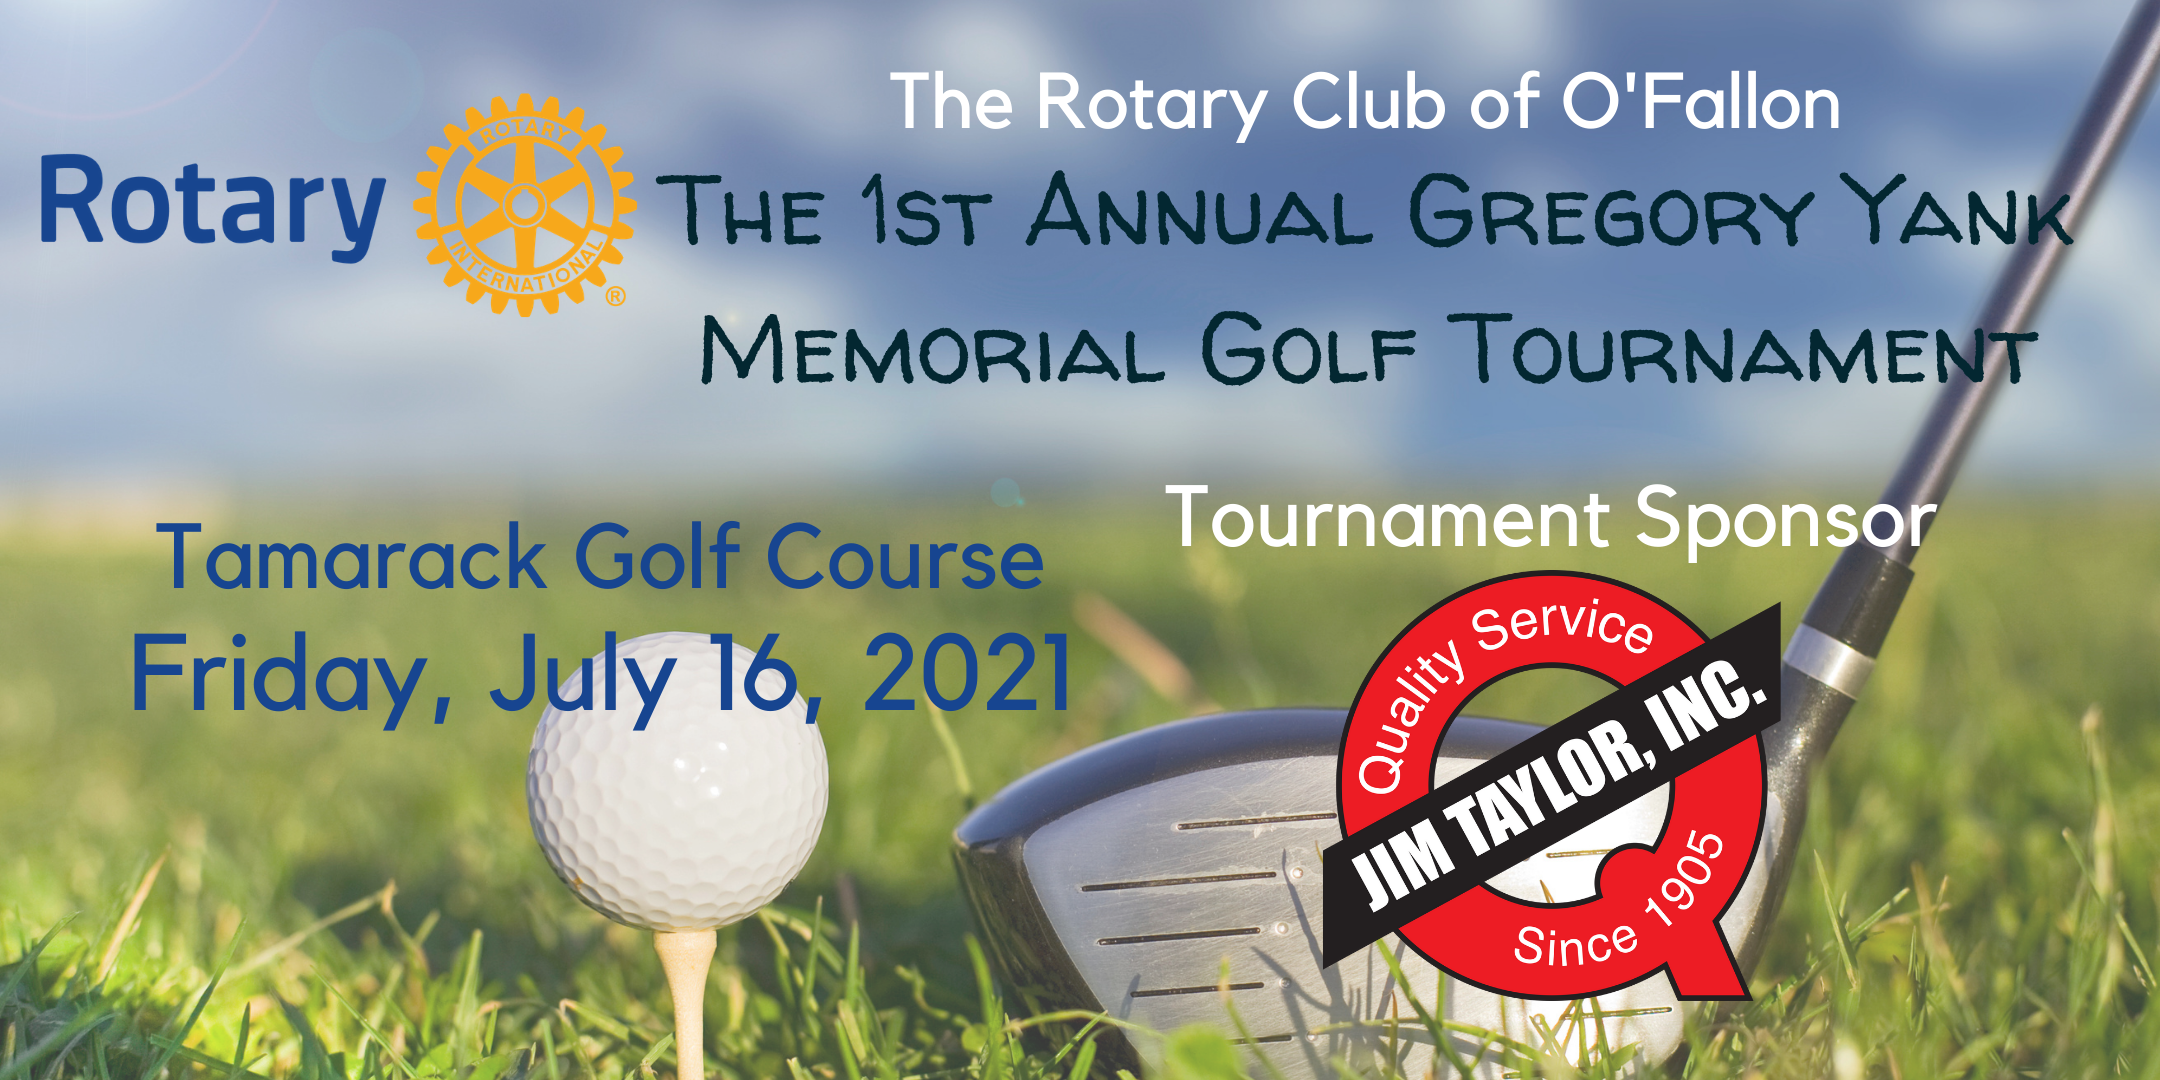 The 1st Annual Gregory Yank Memorial Golf Tournament